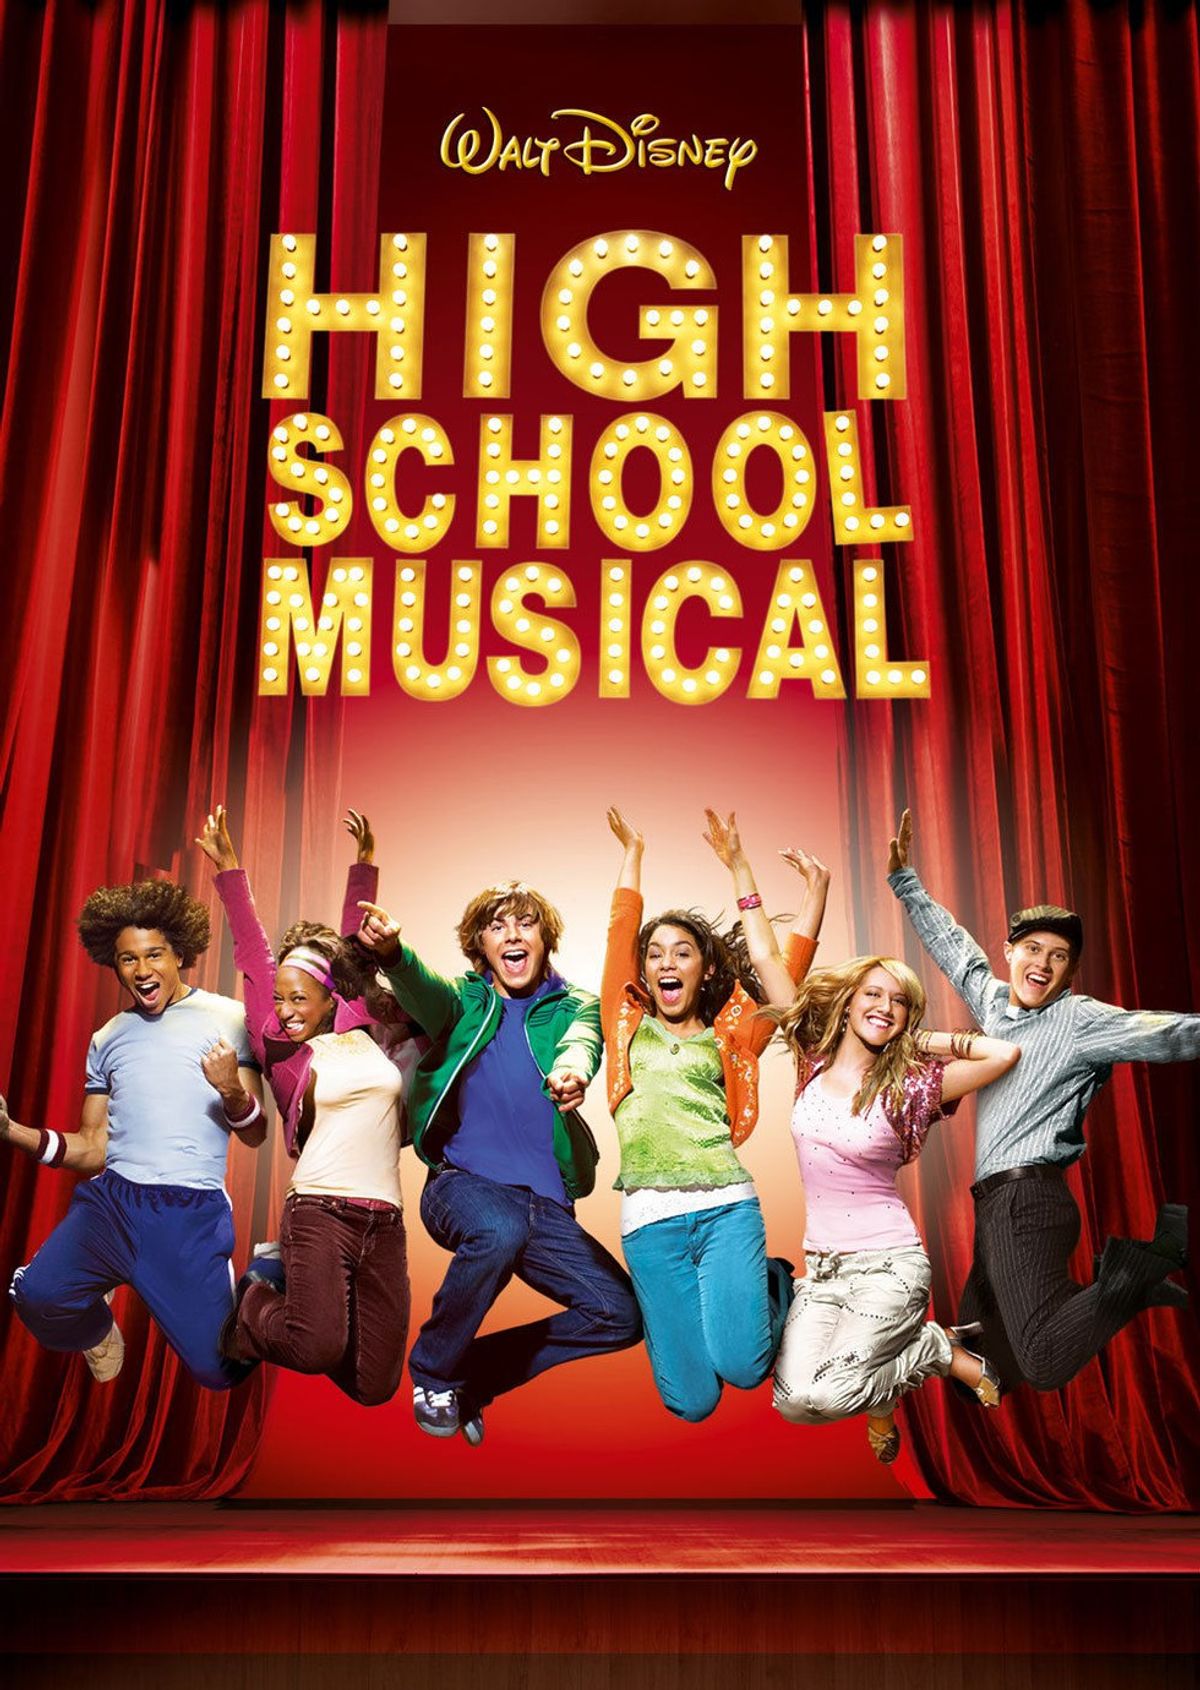 Why I'm Every Character From High School Musical.